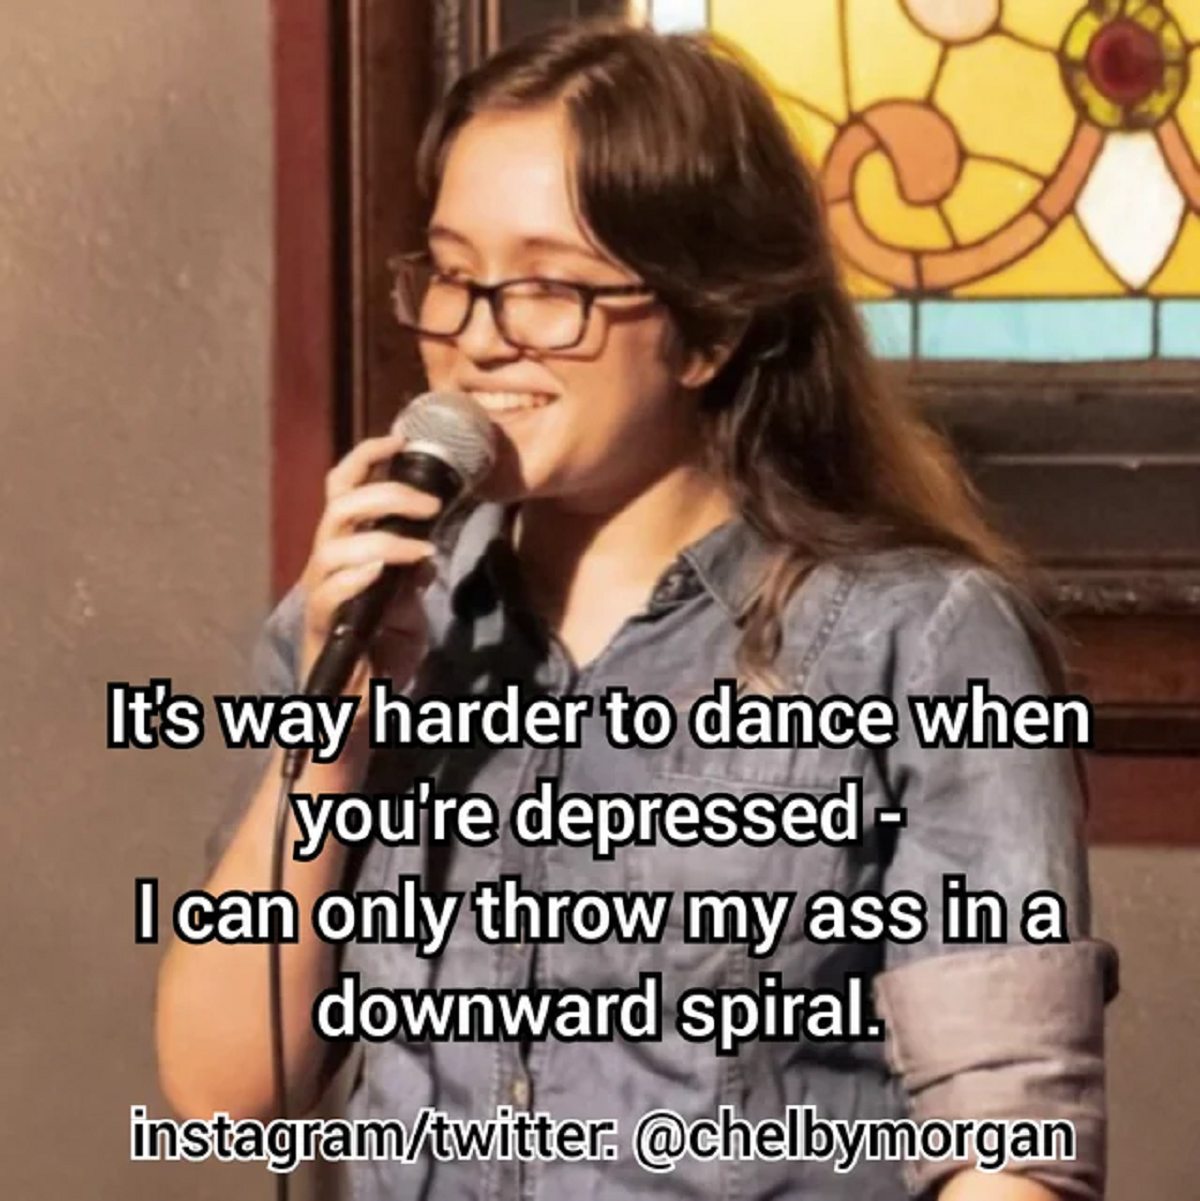 40 Stand Up Jokes That Might Be Comedy Gold.